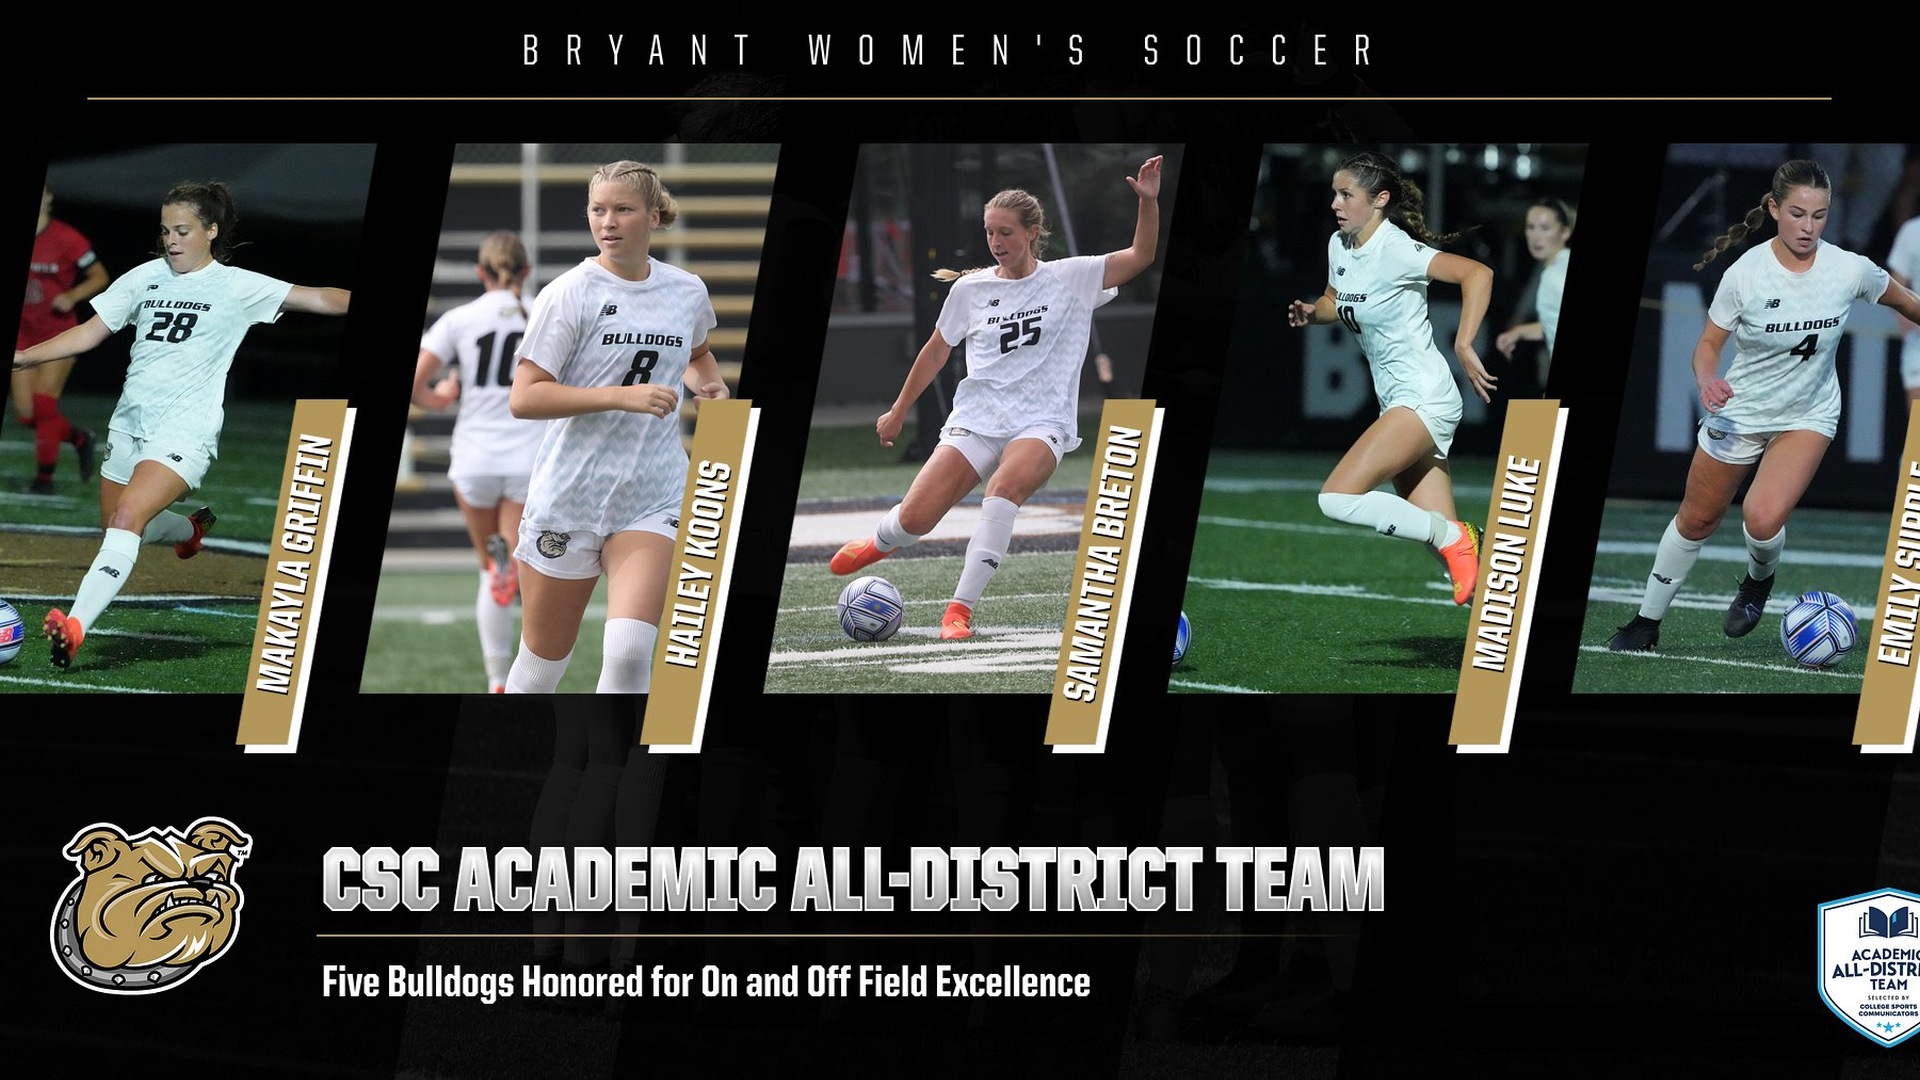 Five named to CSC Academic All-District Team